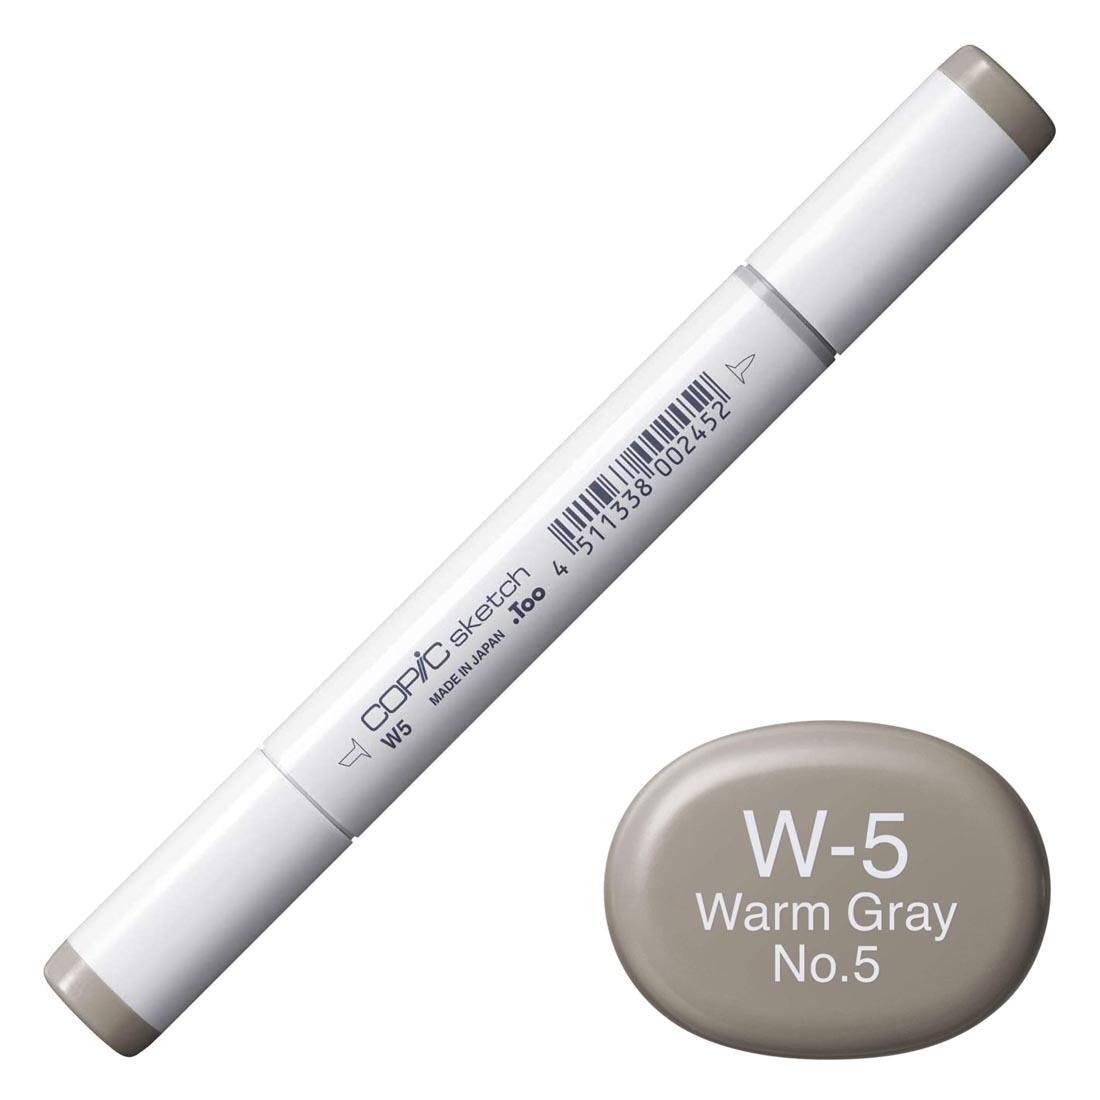 COPIC Sketch Marker with a color swatch and text of W-5 Warm Gray No.5